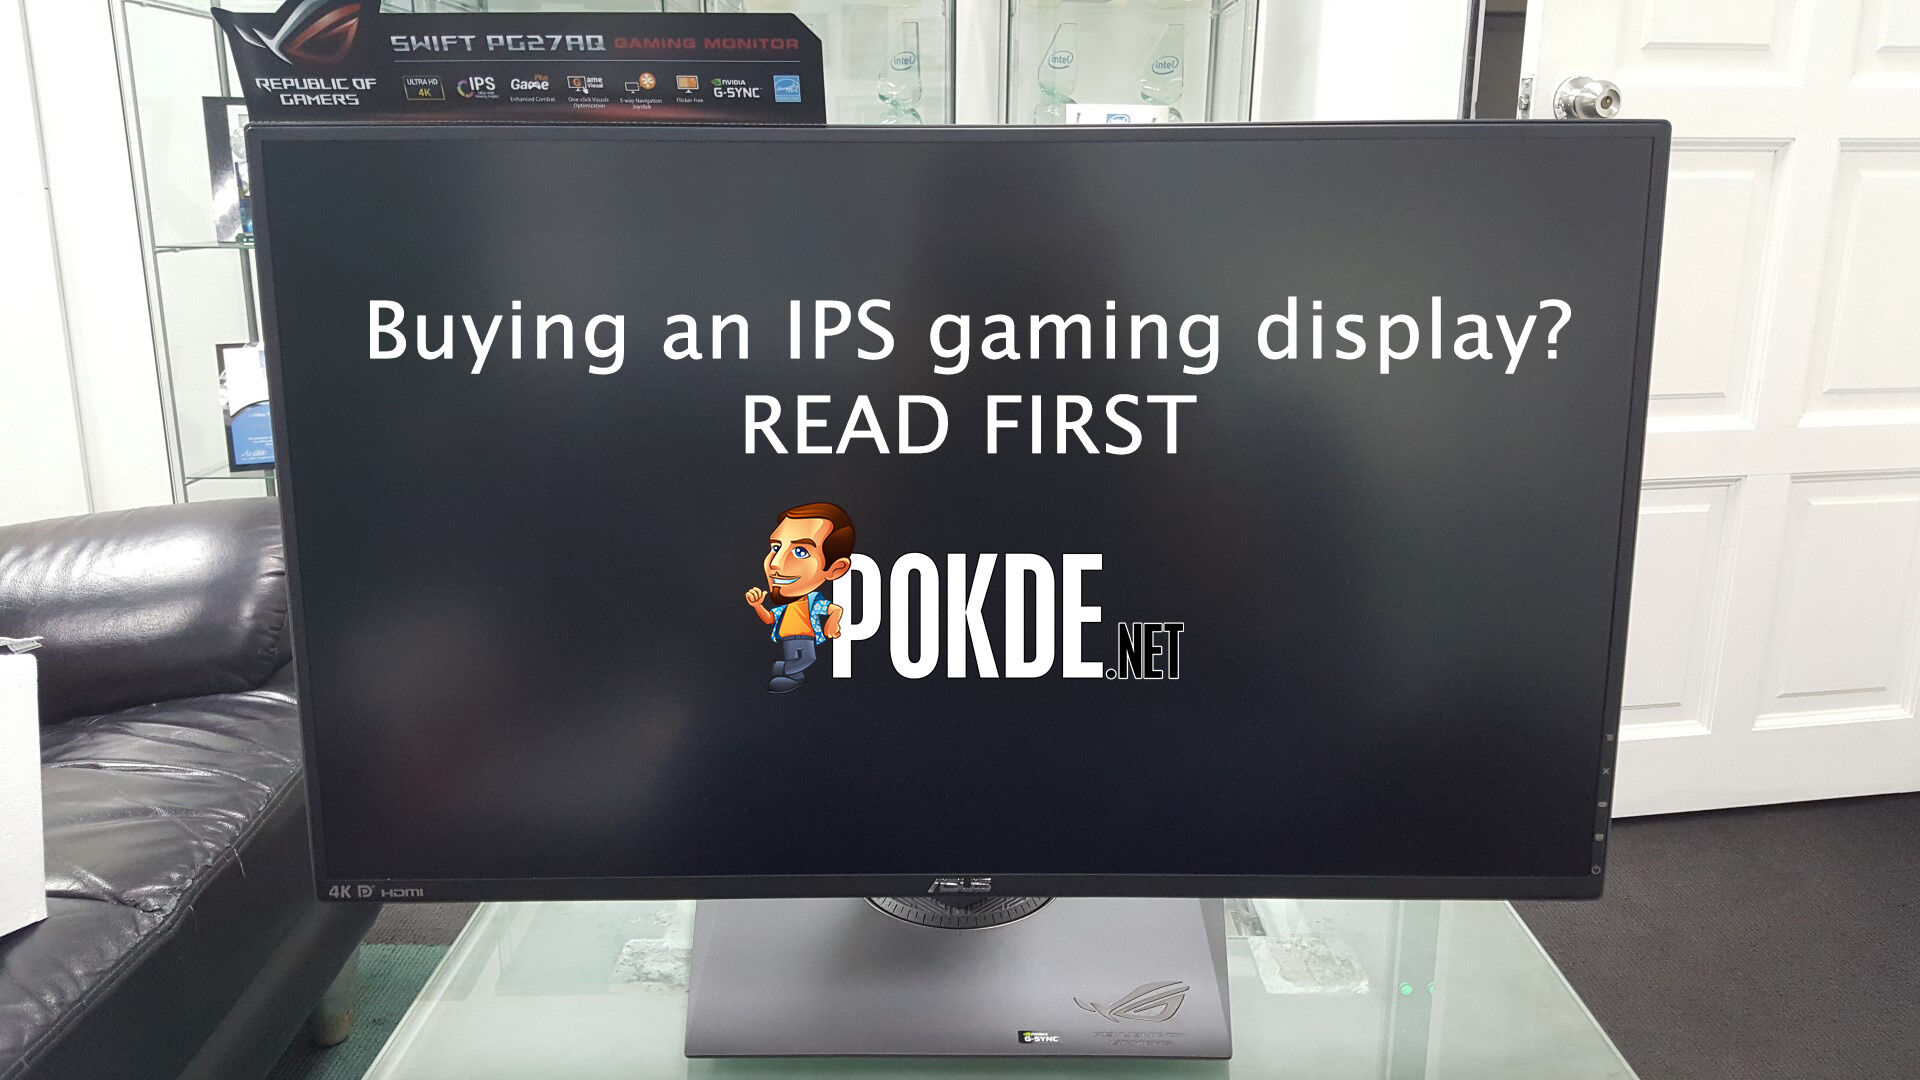 Buying an "IPS gaming display"? Read this first... Seriously! 23